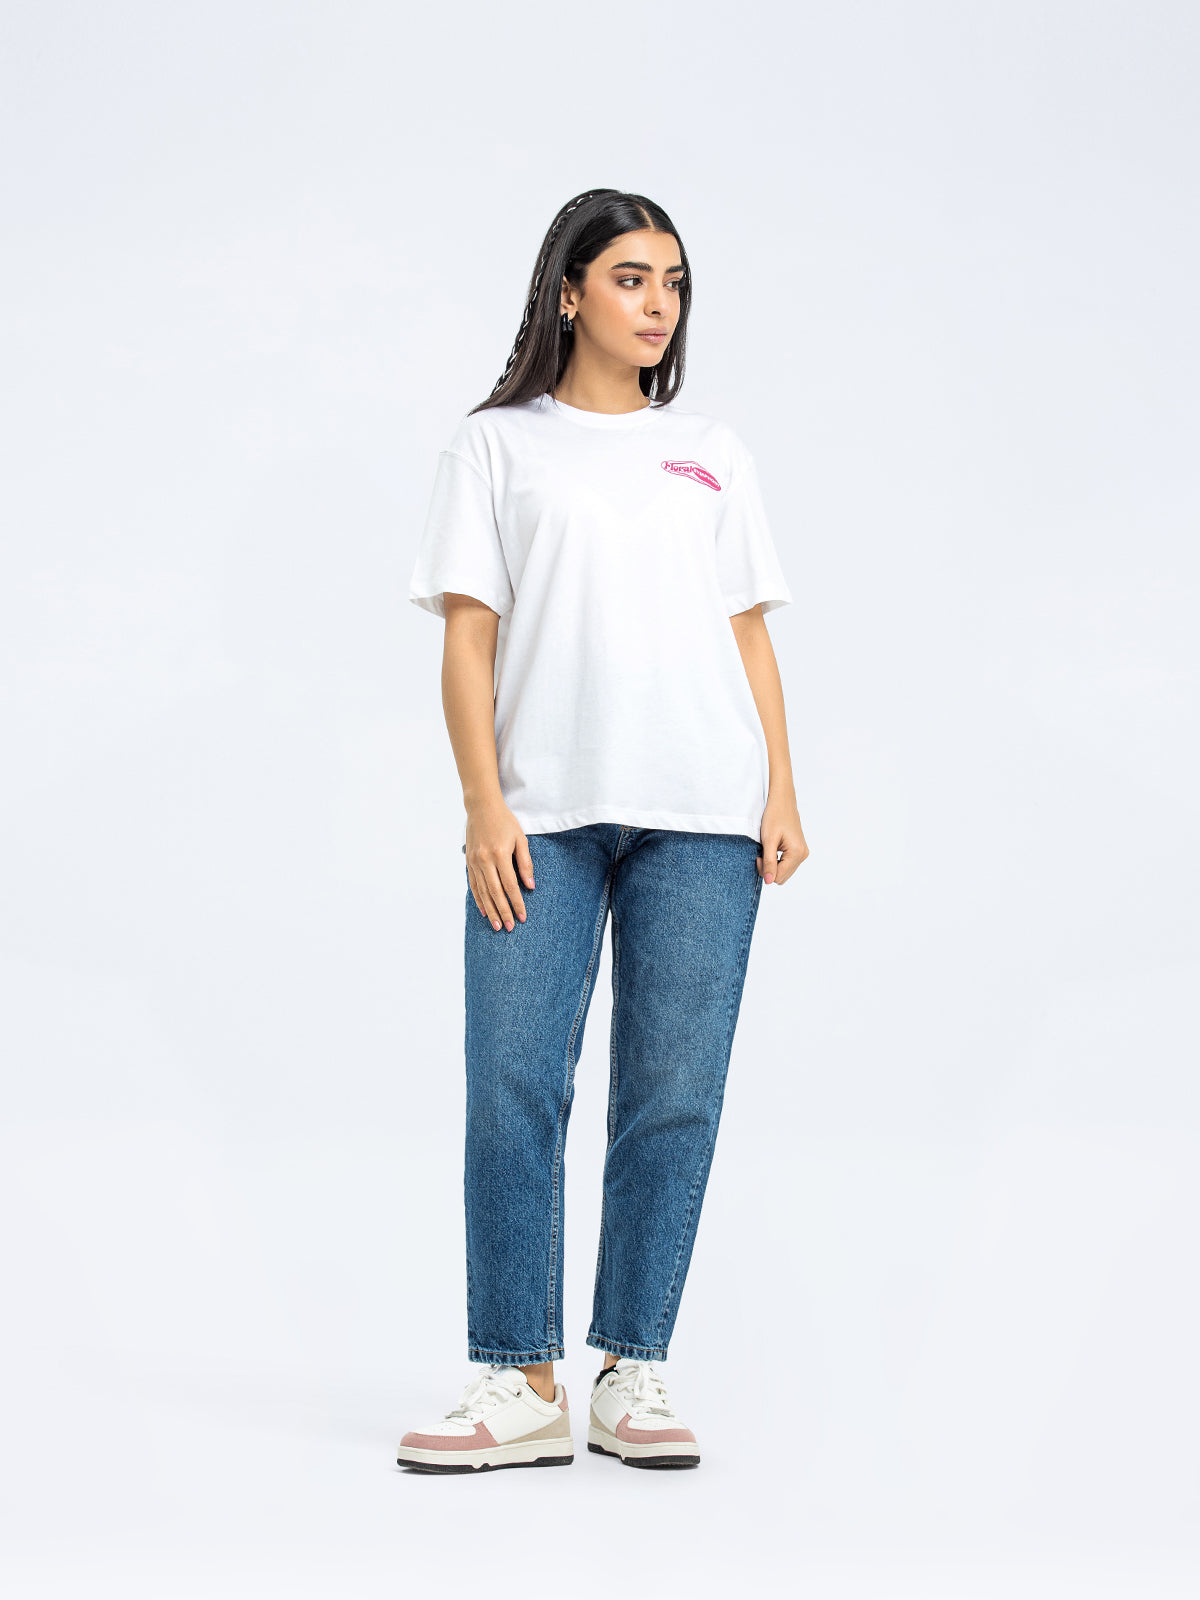 Relaxed Fit Graphic Tee - FWTGT24-015